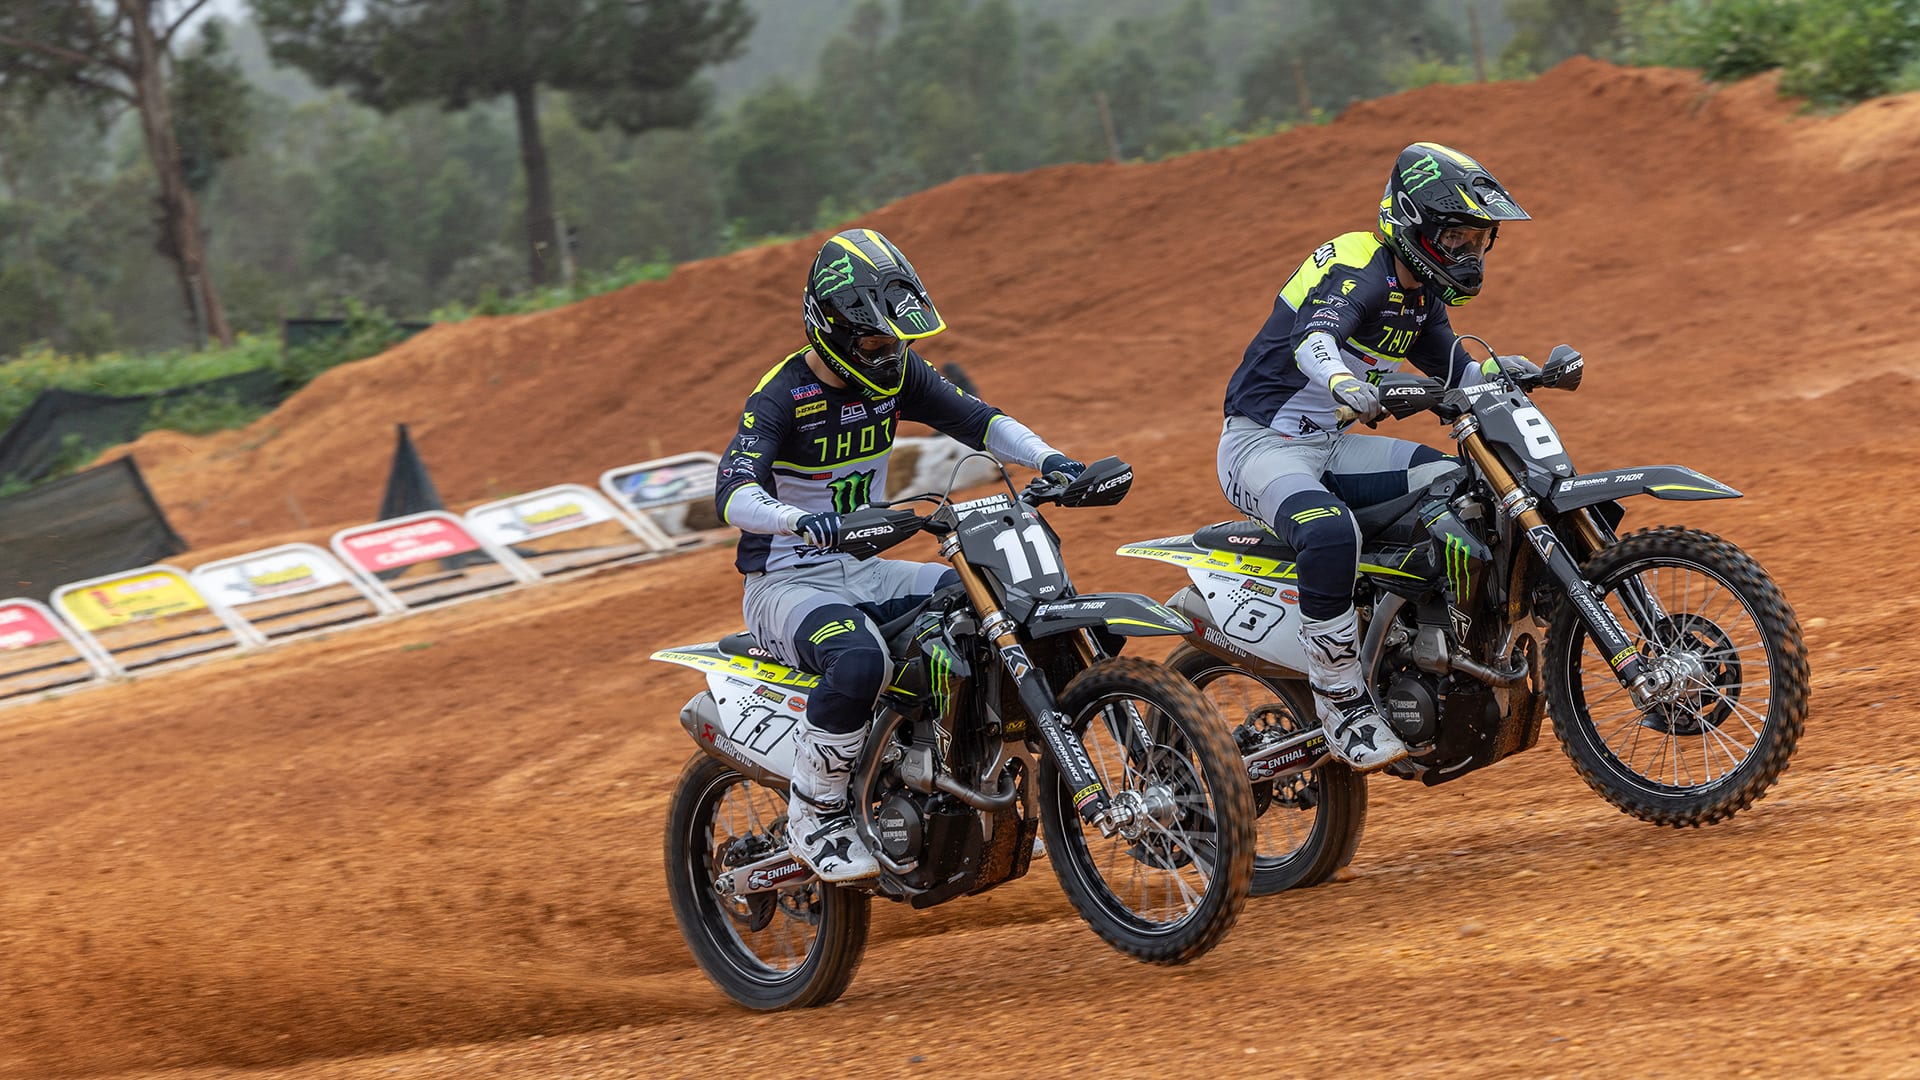 Monster Energy Triumph Racing riders on their TF 250-X